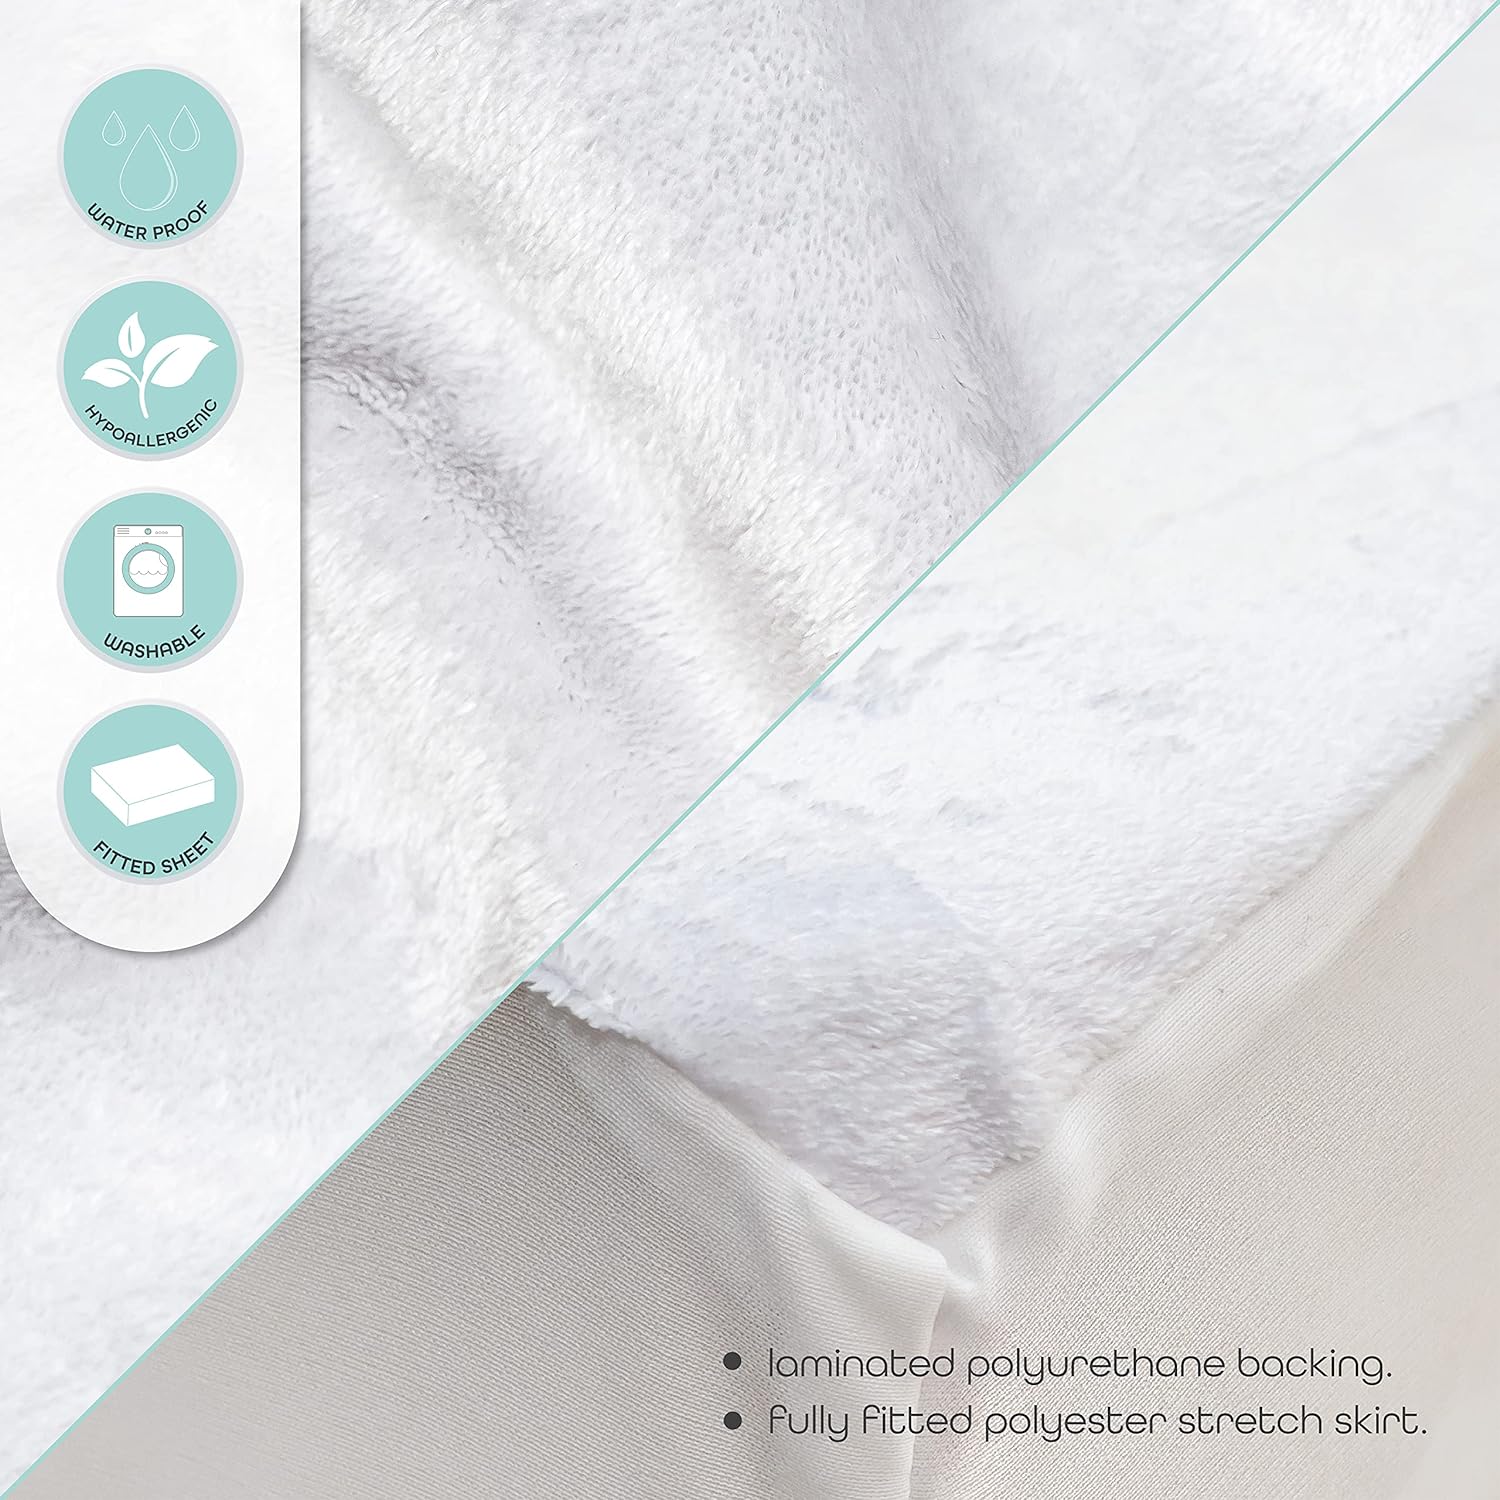 Moon Water Proof Mattress Protector, 70 x 140 x 12 cm Size, White